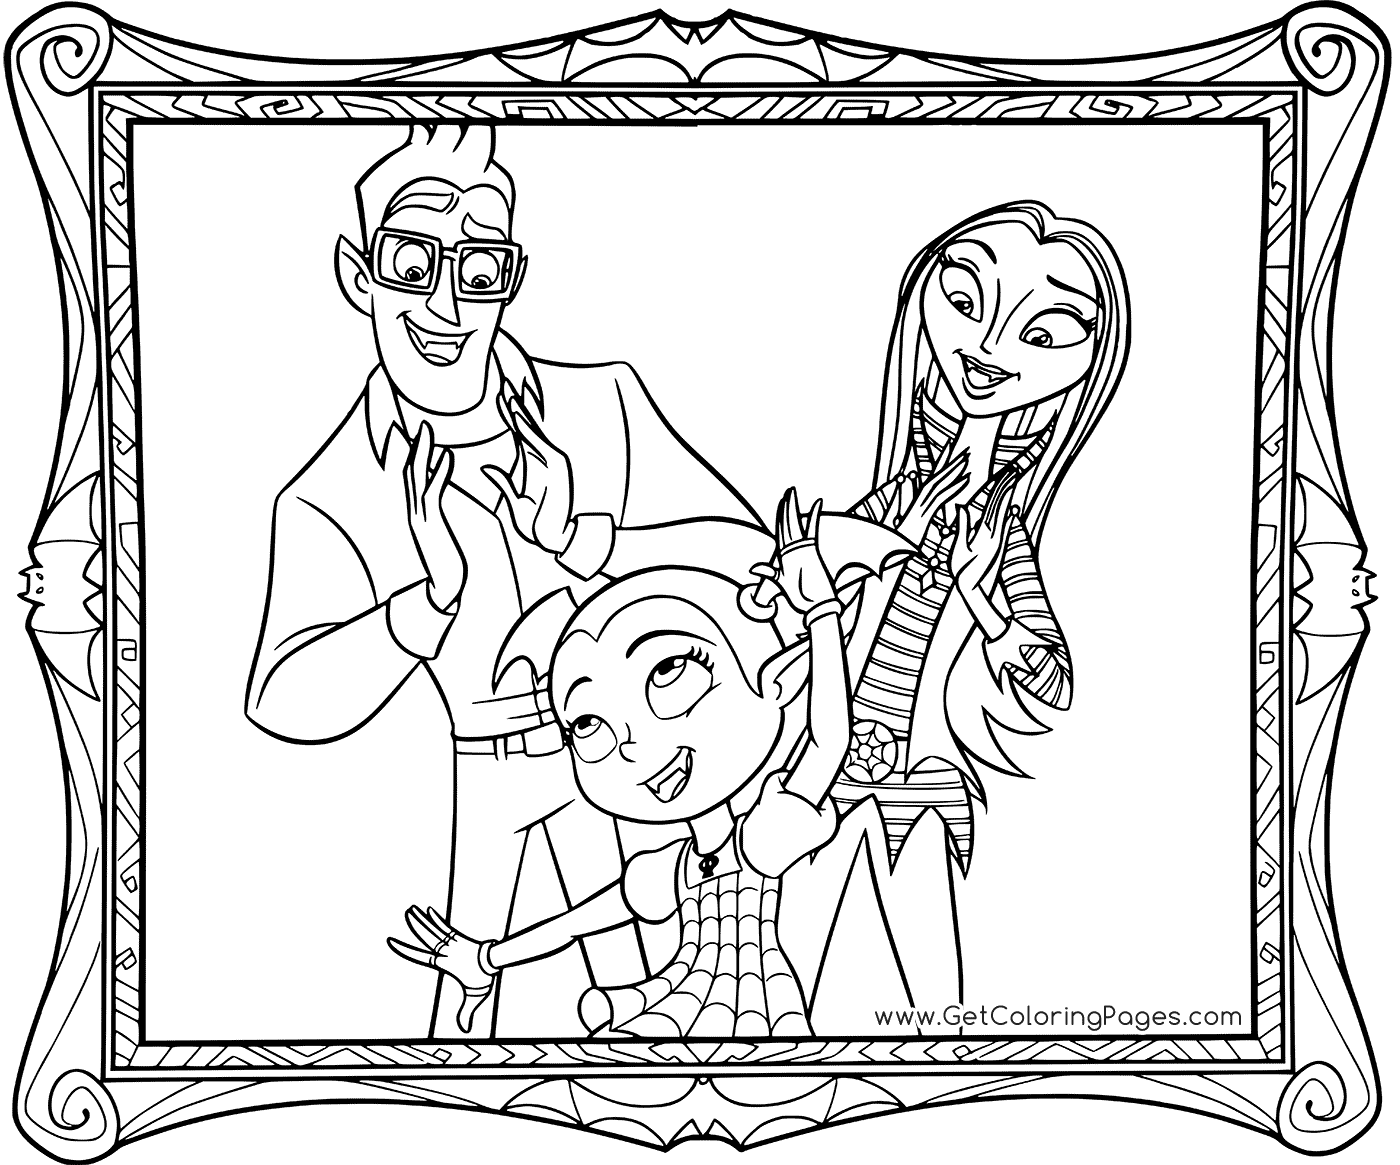 810  Vampirina Coloring Pages Online  Latest HD